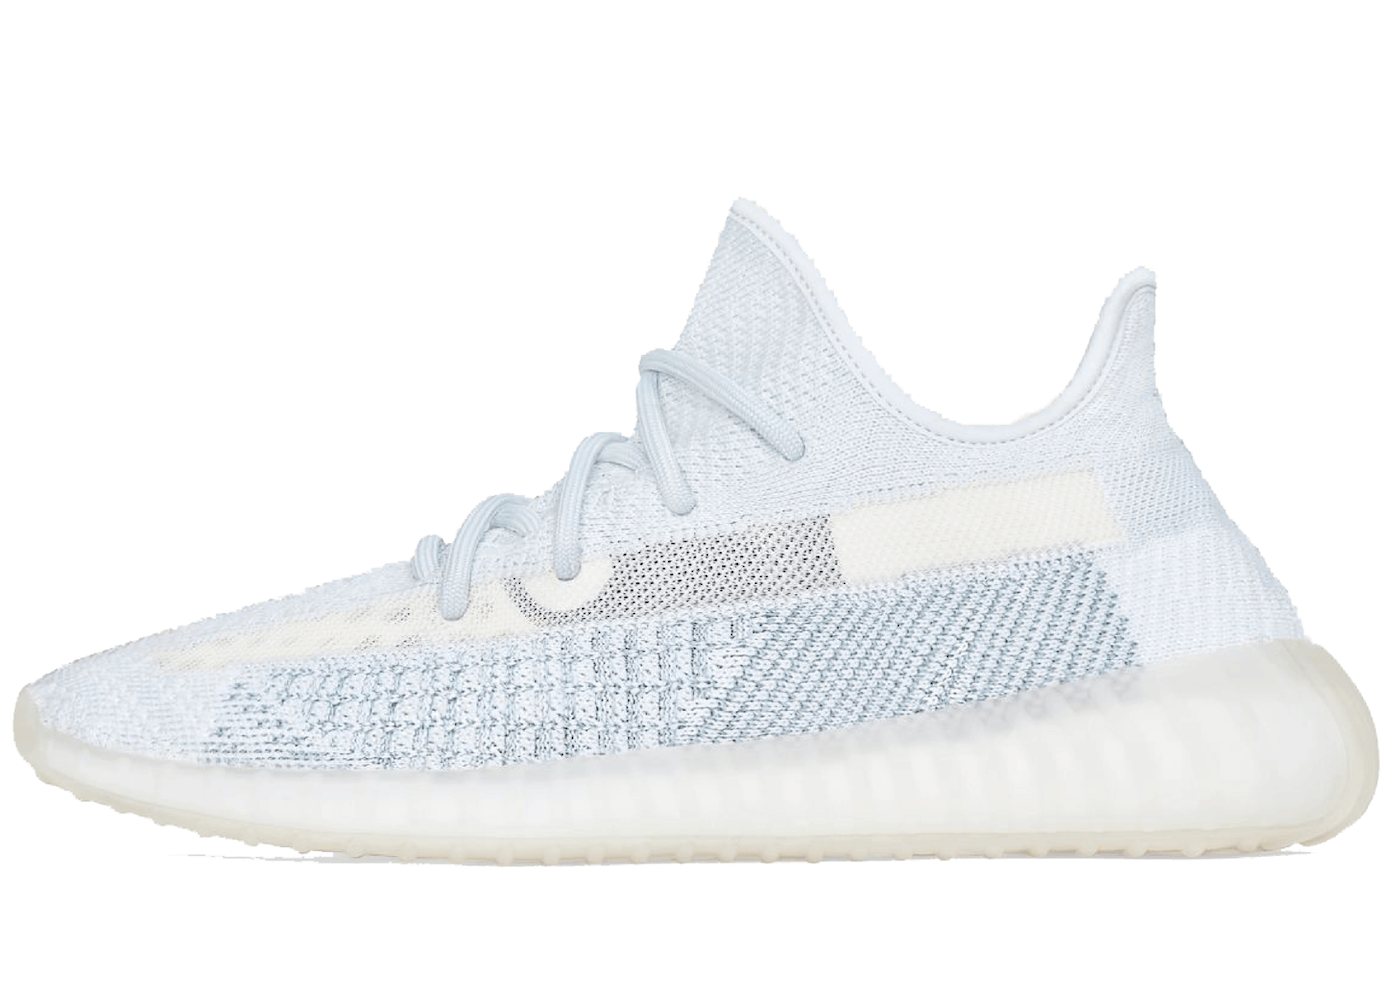 Yeezy-Boost-350-V2-Cloud-white